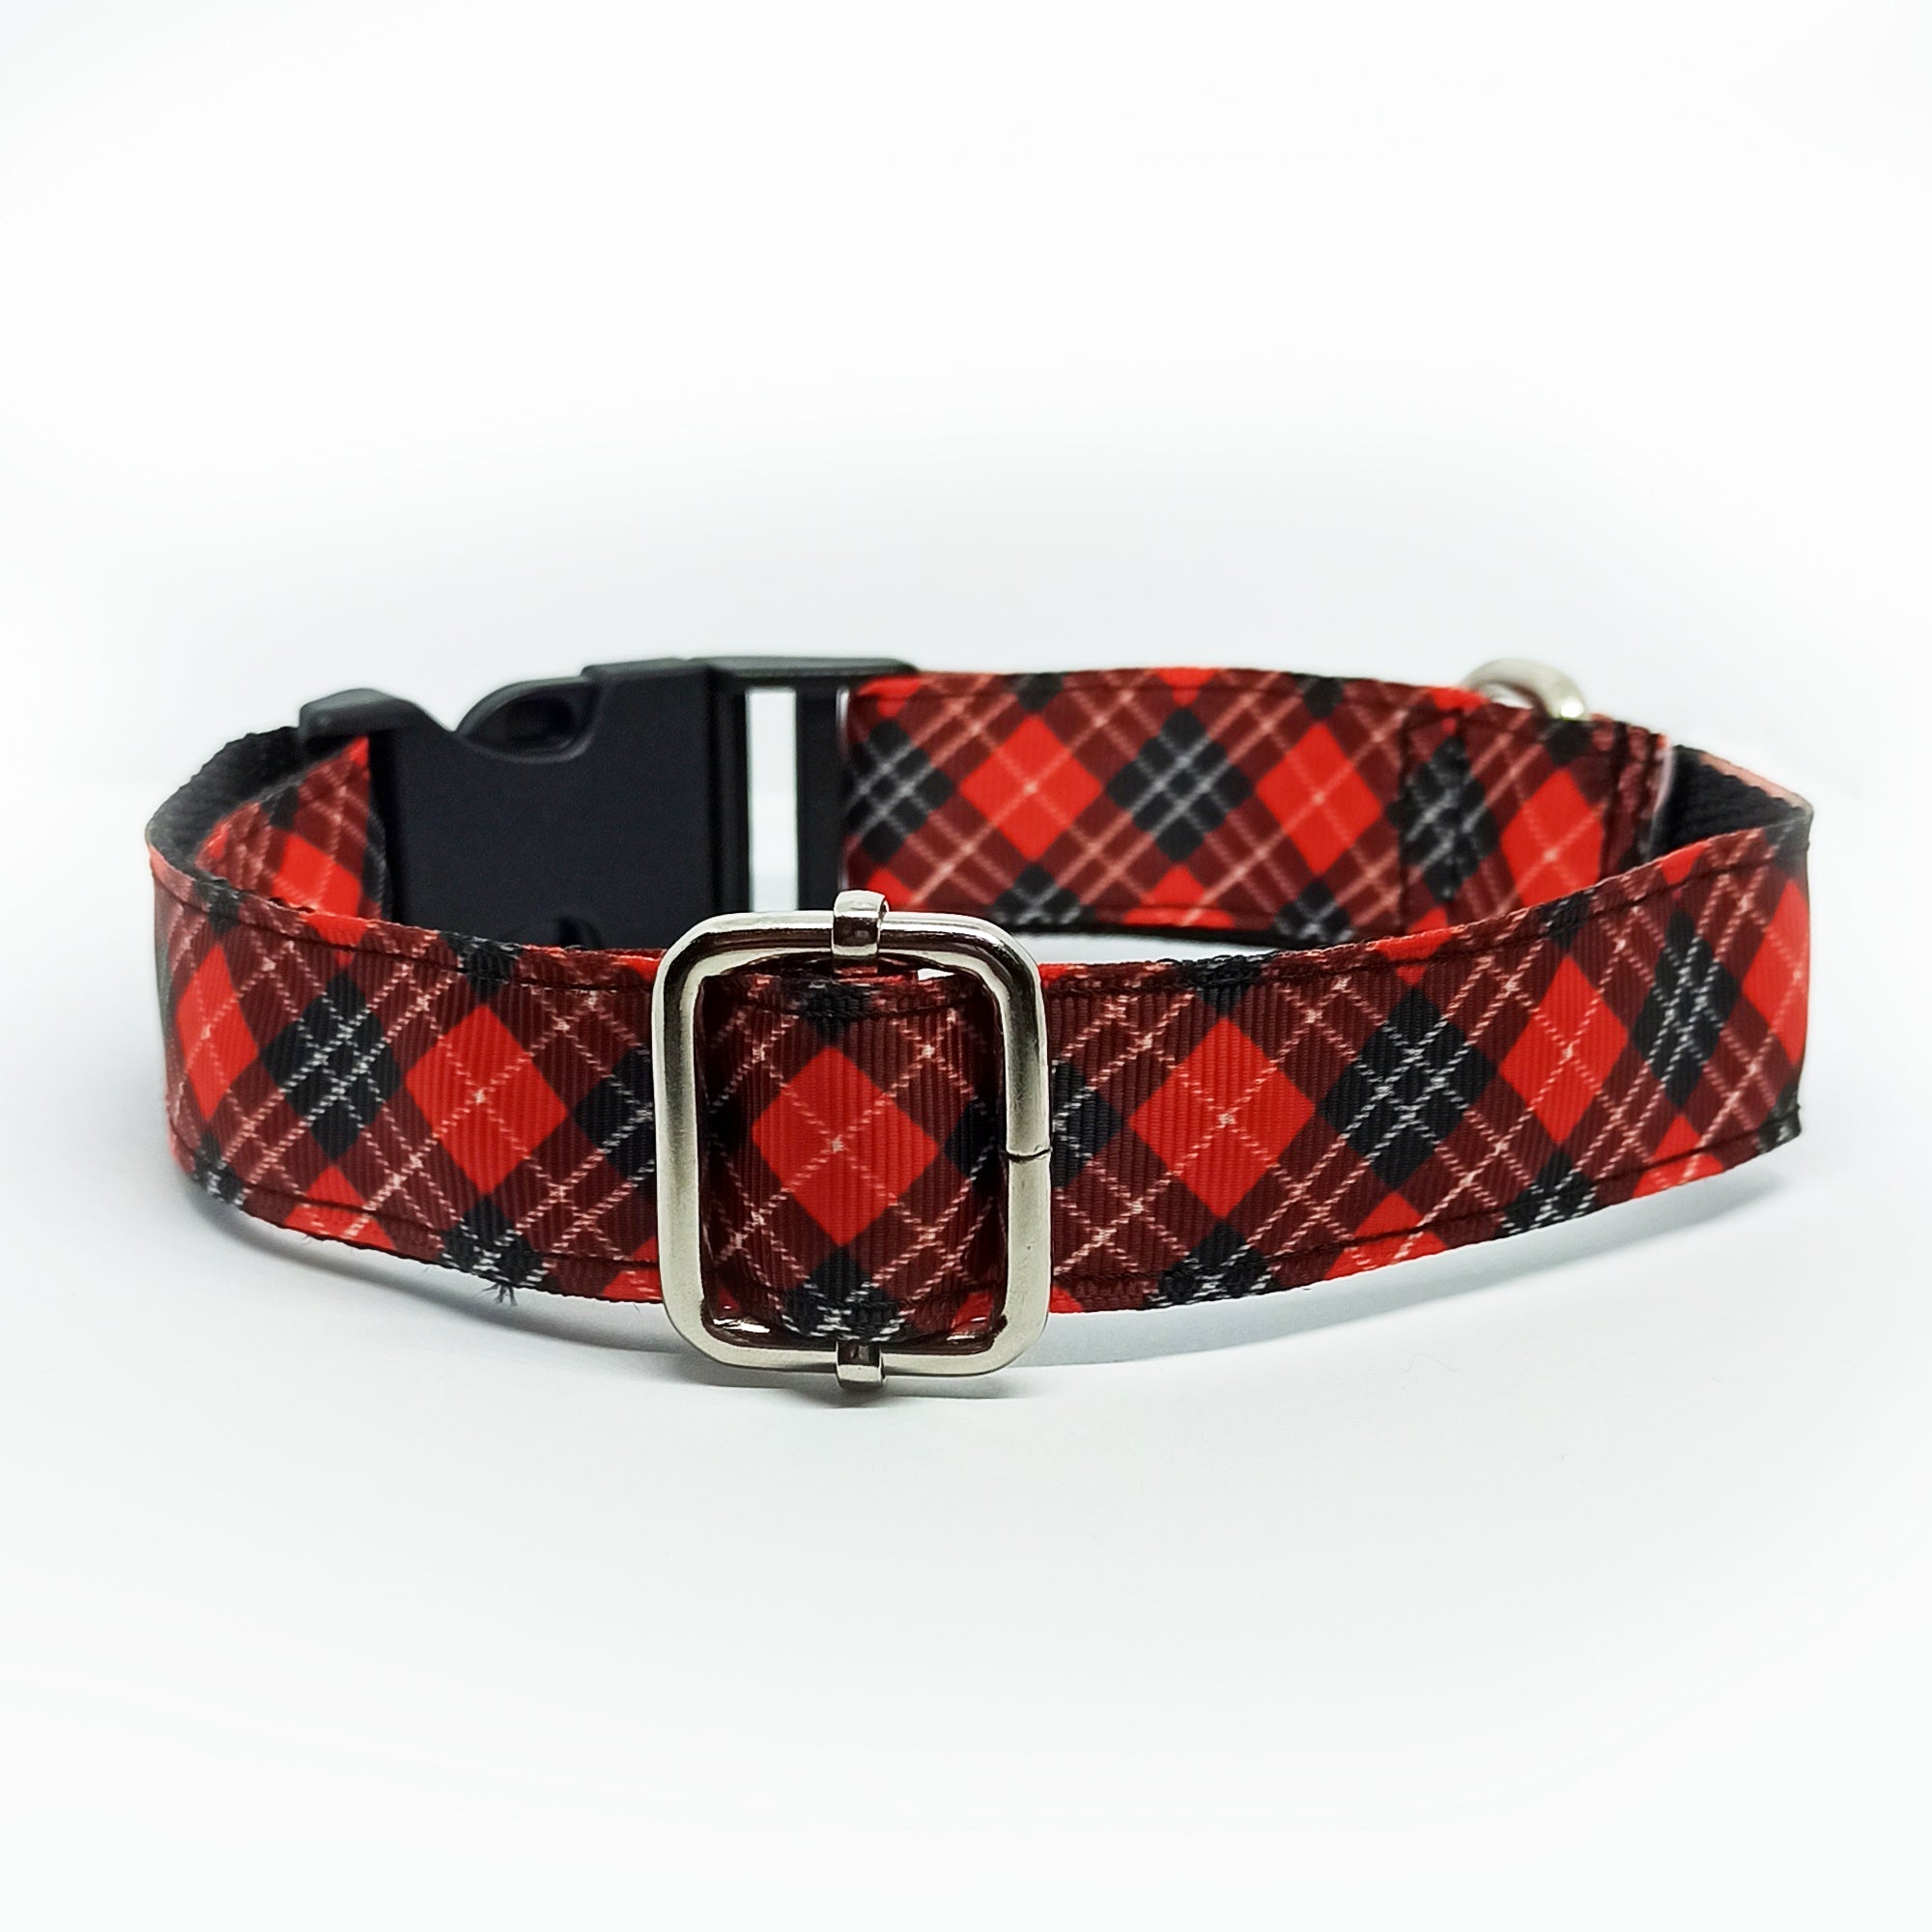 Red and Black Check Dog Collar - S-L sizes with custom matching pet tag - Adventures of Rubi